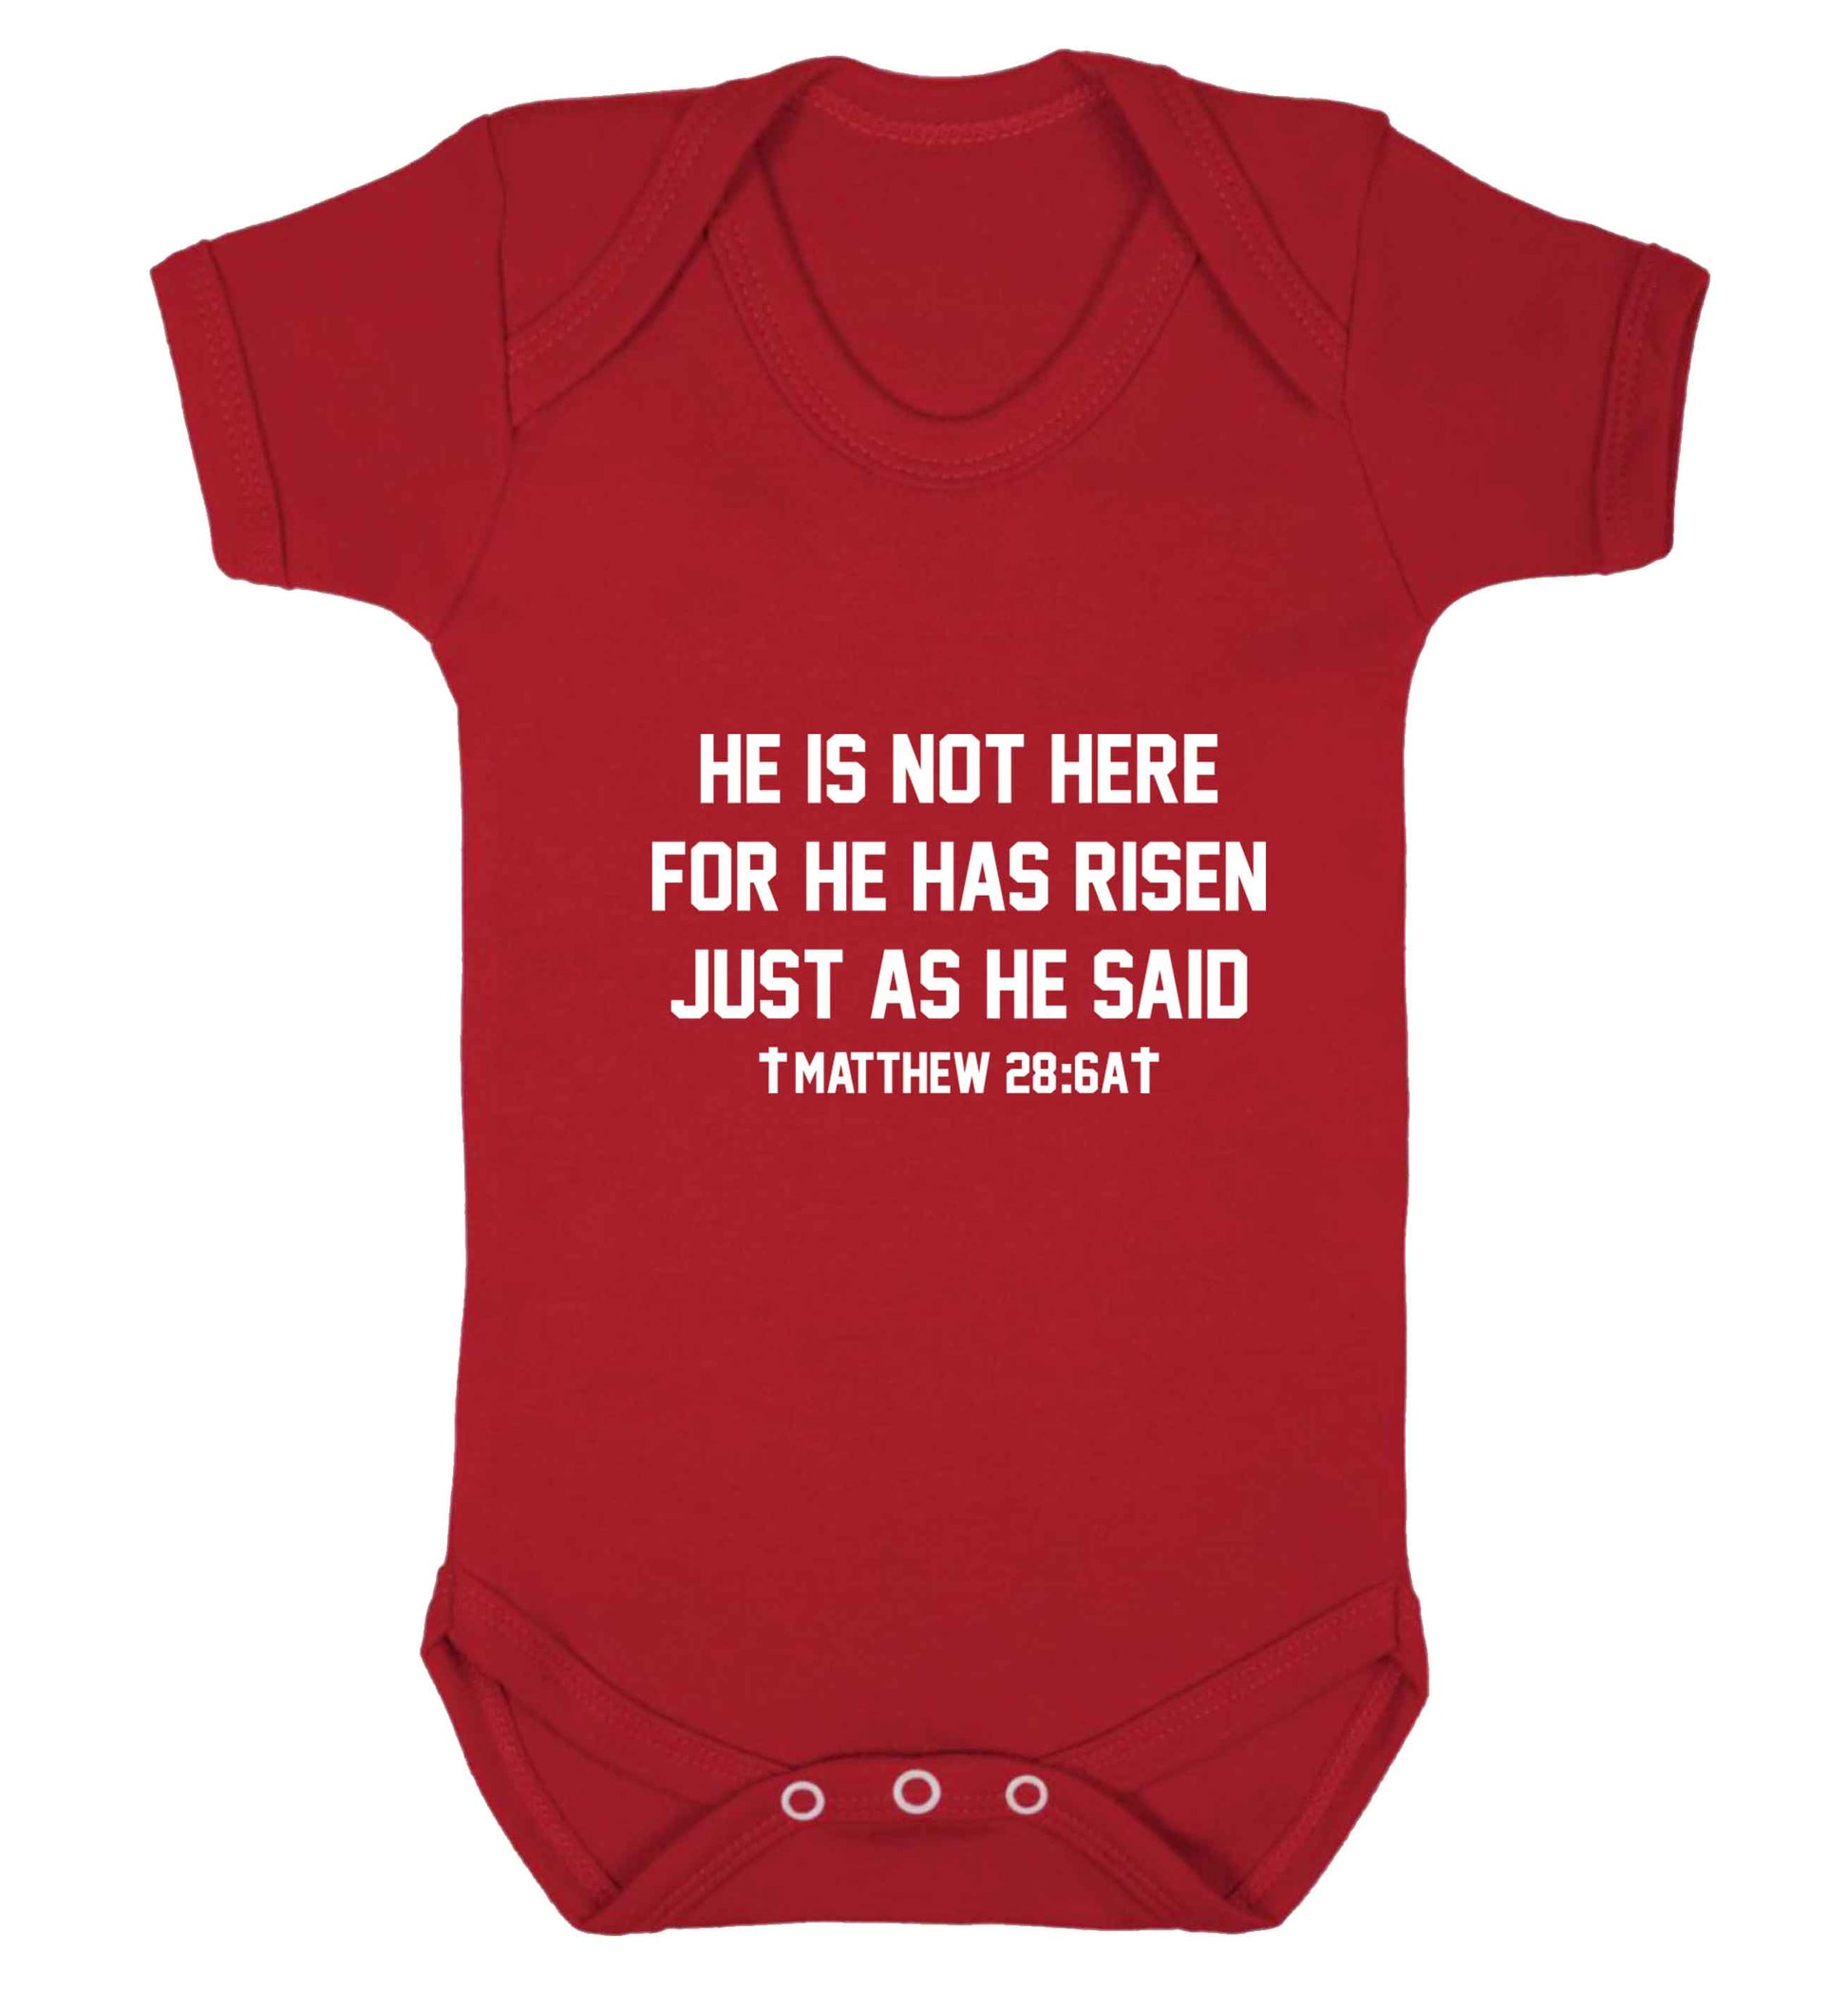 He is not here for he has risen just as he said matthew 28:6A baby vest red 18-24 months